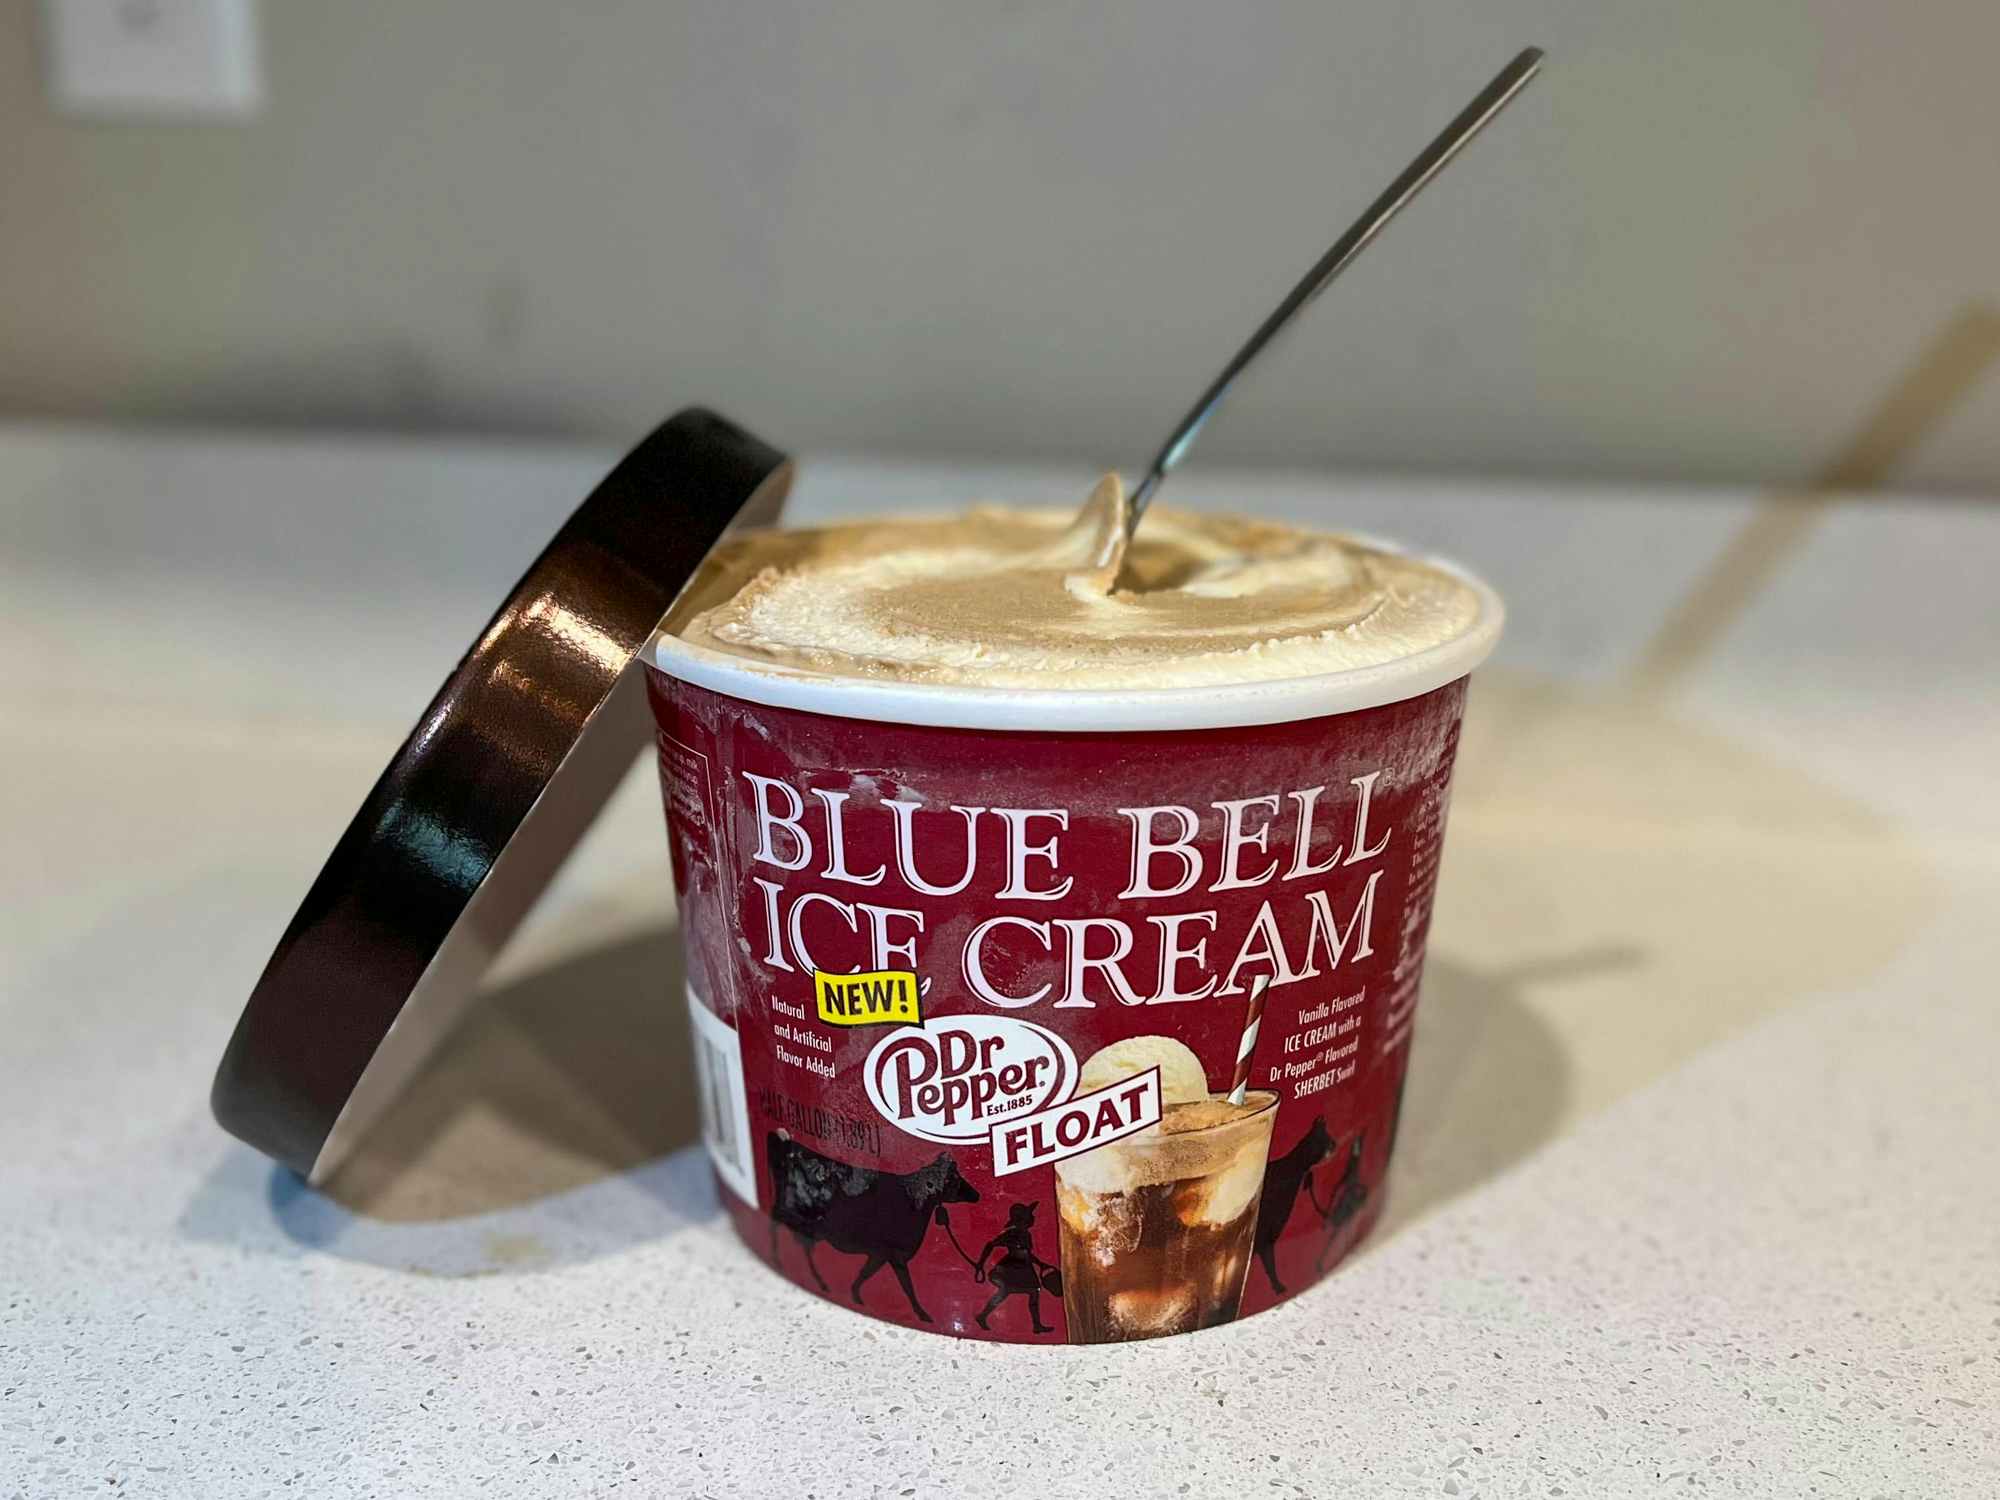 Blue Bell Dr. Pepper Float ice cream on someone's counter